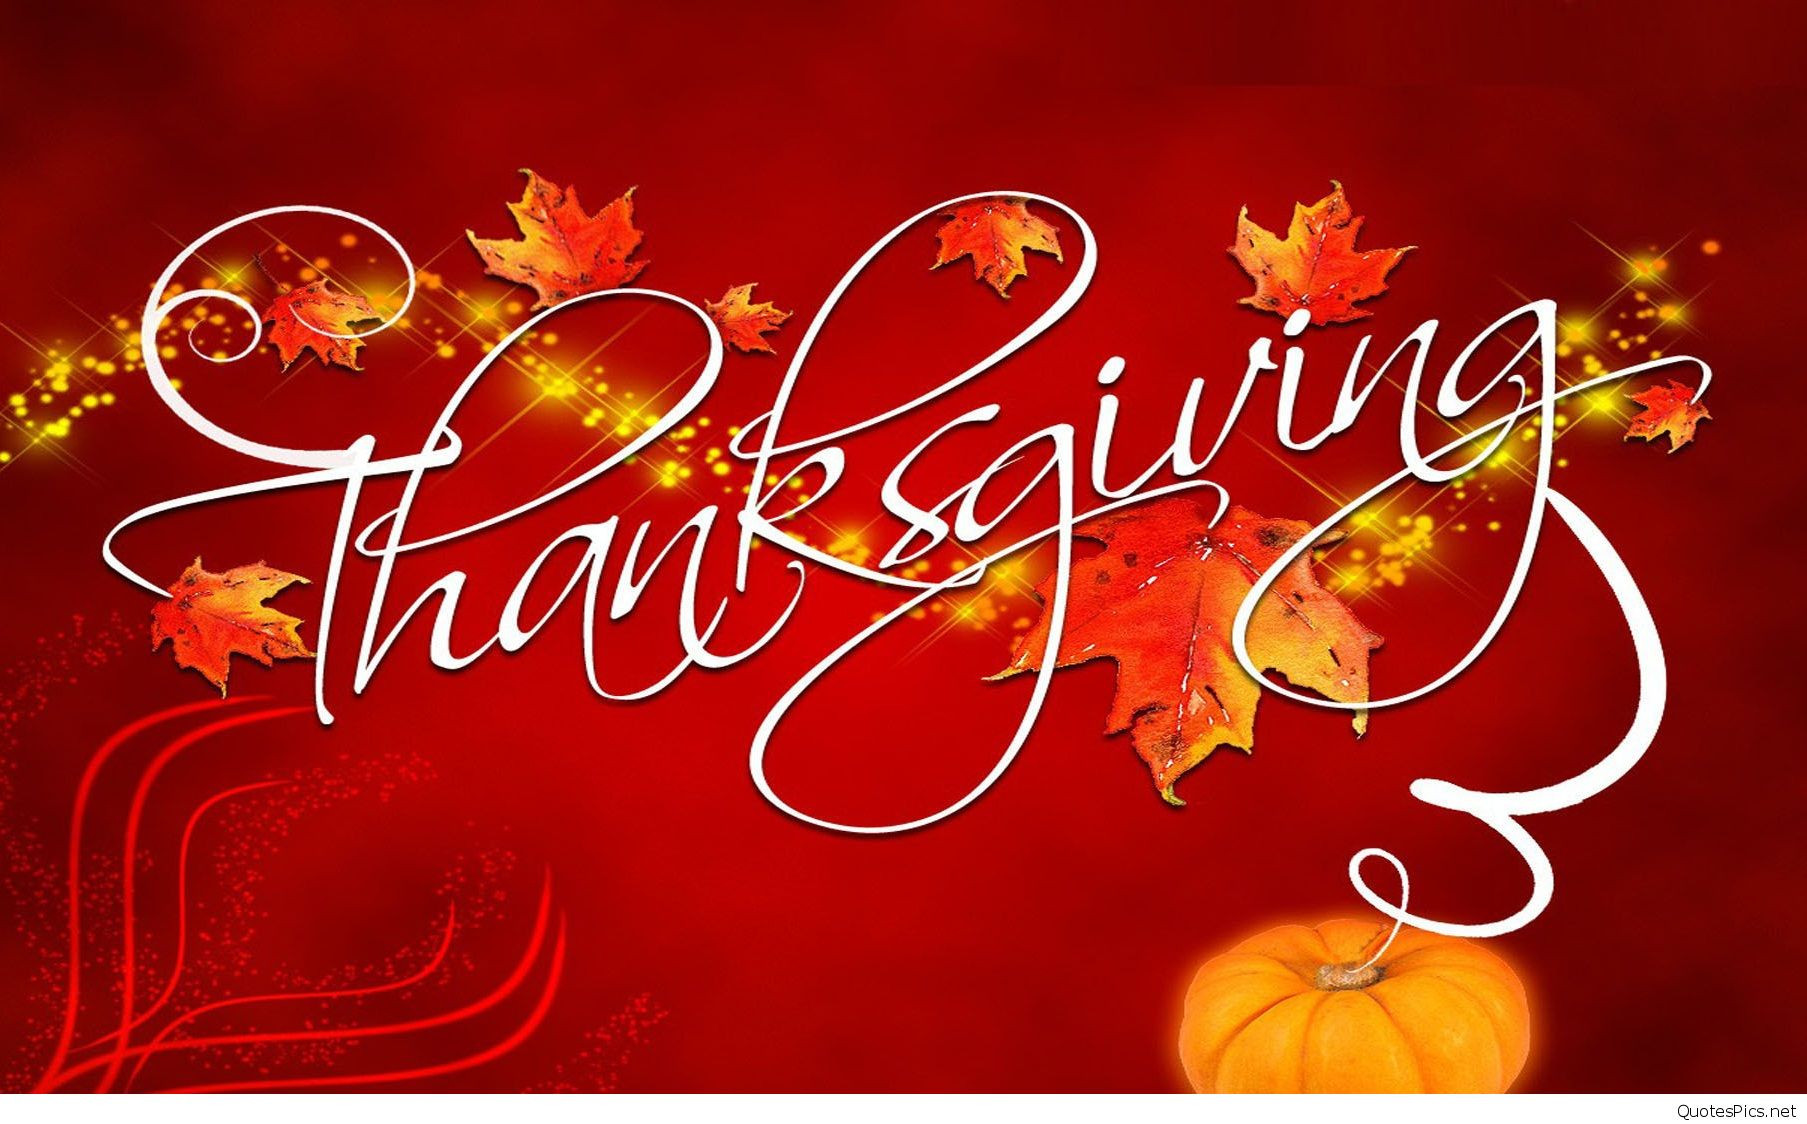 Thanksgiving 2017 Quotes
 Cute Happy Thanksgiving wallpapers quotes images 2016 2017